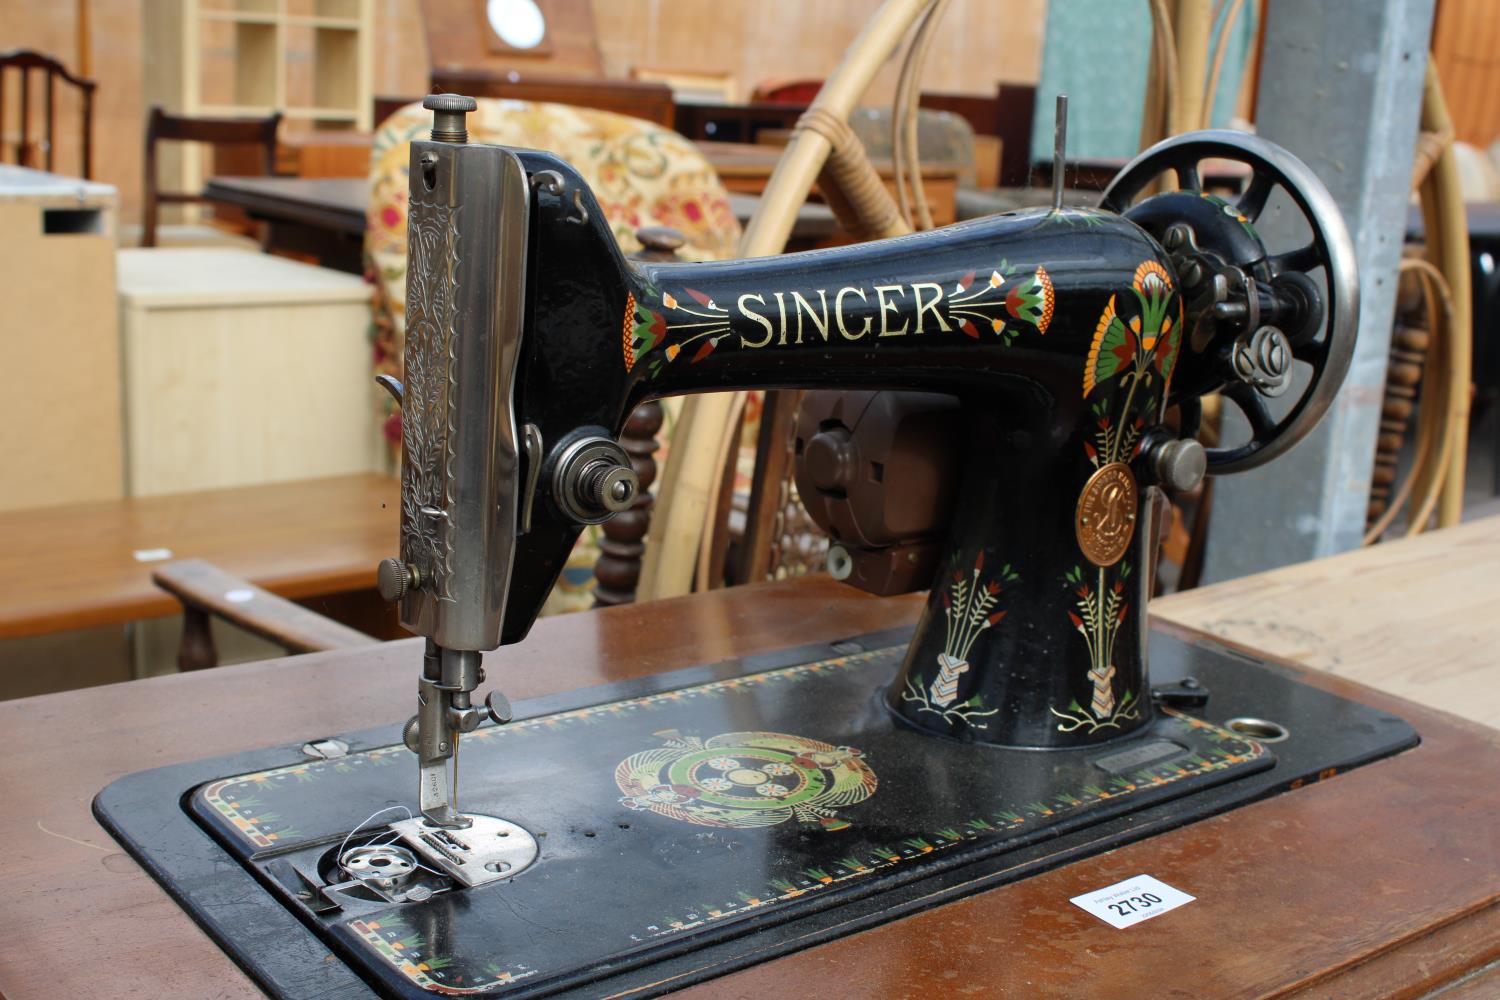 A SINGER SEWING MACHINE (F6827139) IN CABINET - Image 2 of 2